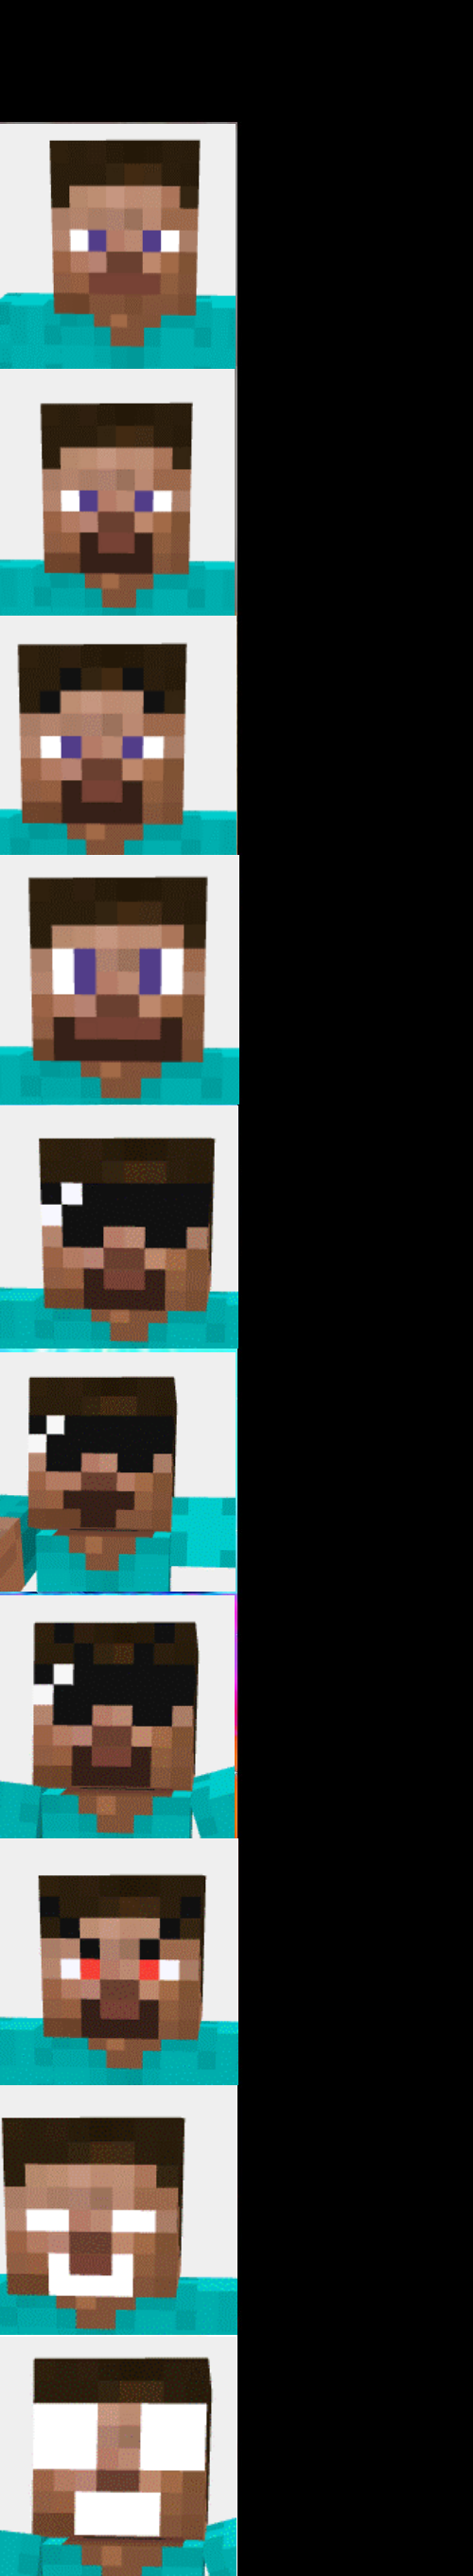 High Quality steve becoming canny Blank Meme Template